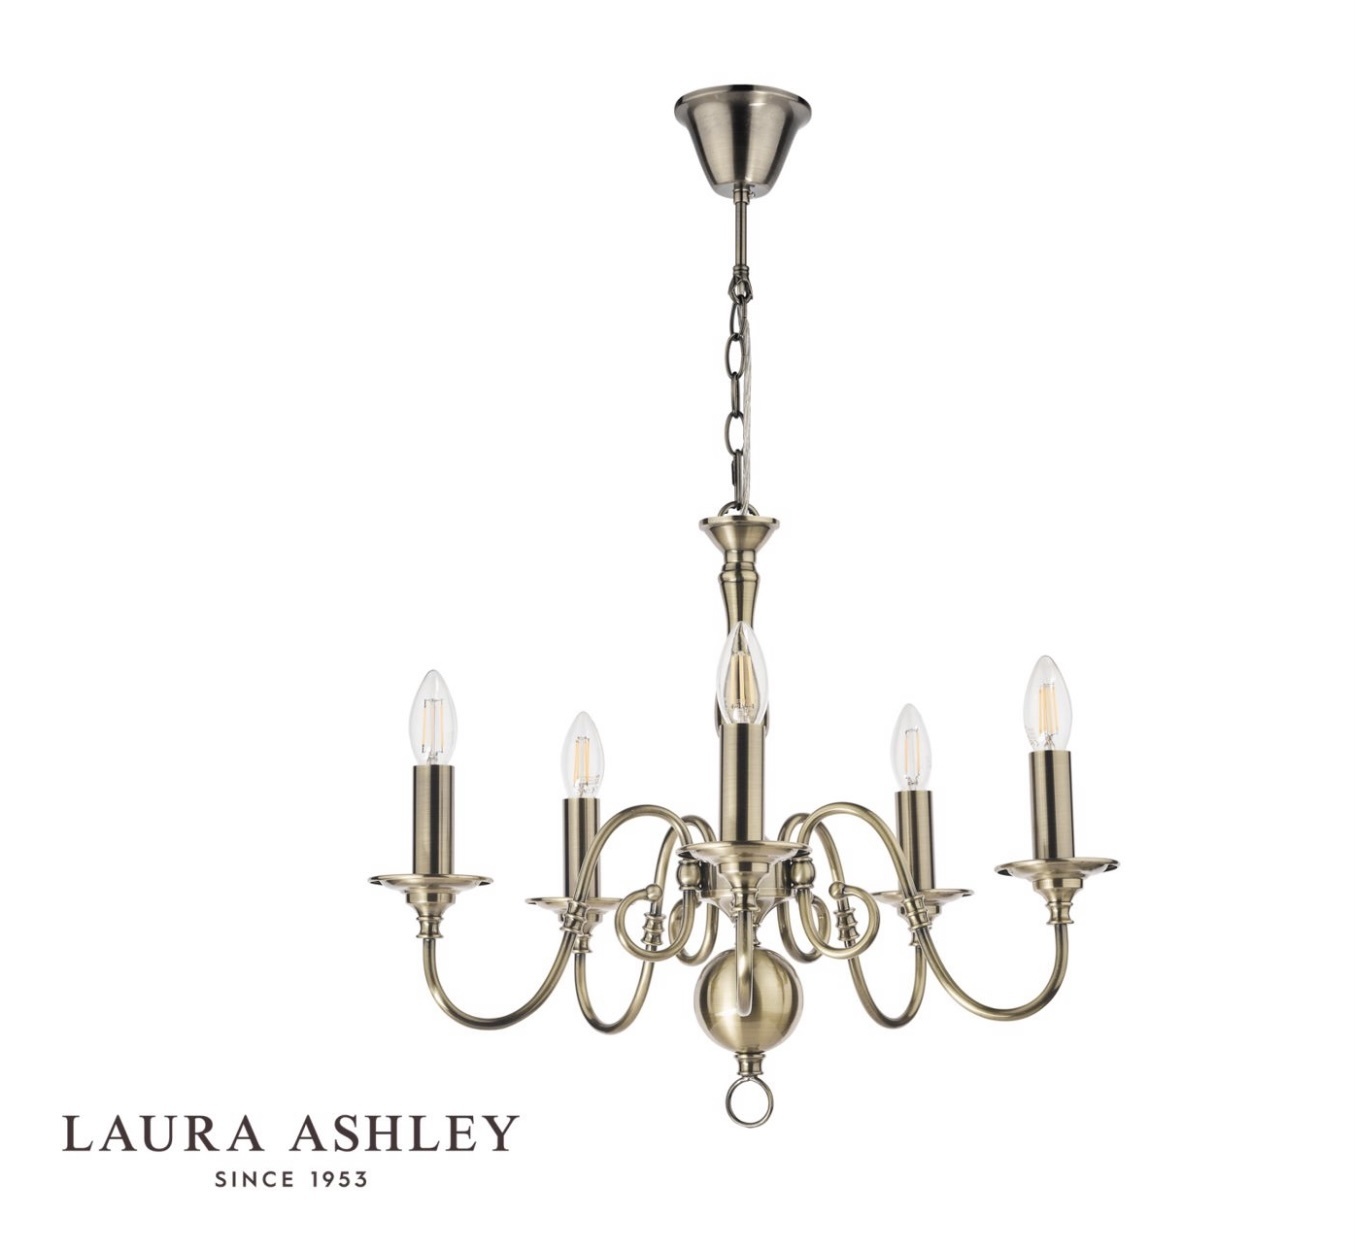 5 Light Armed Fitting Antique Brass Crystal